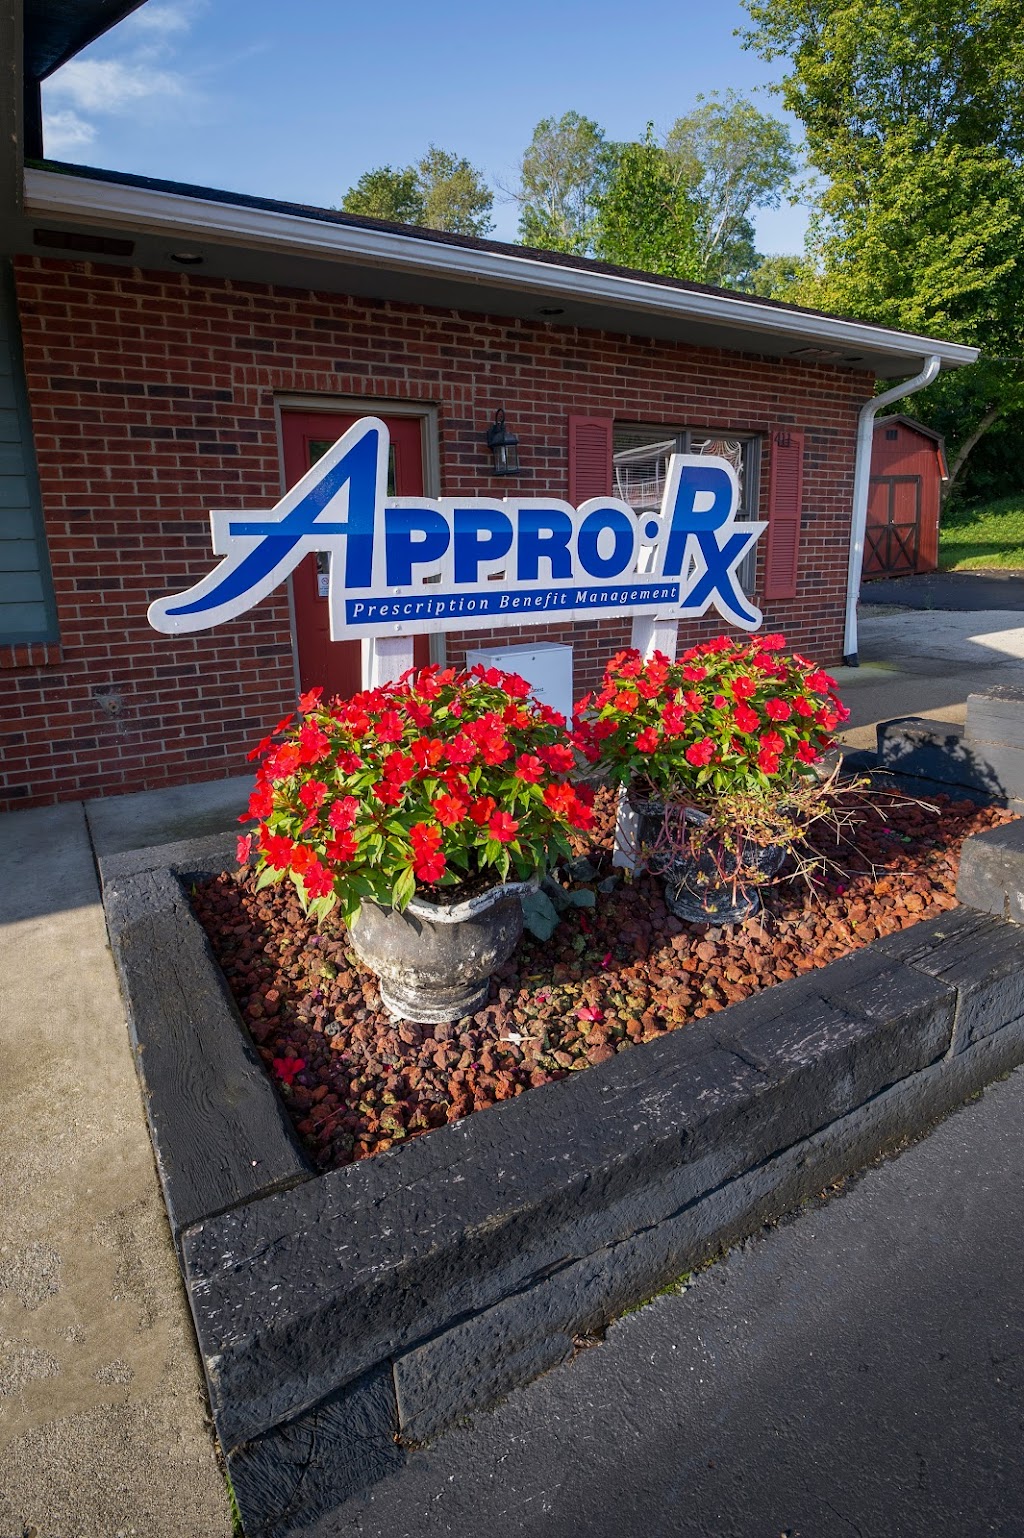 Appro-Rx | 415 S Main St, Waynesville, OH 45068 | Phone: (513) 897-1476